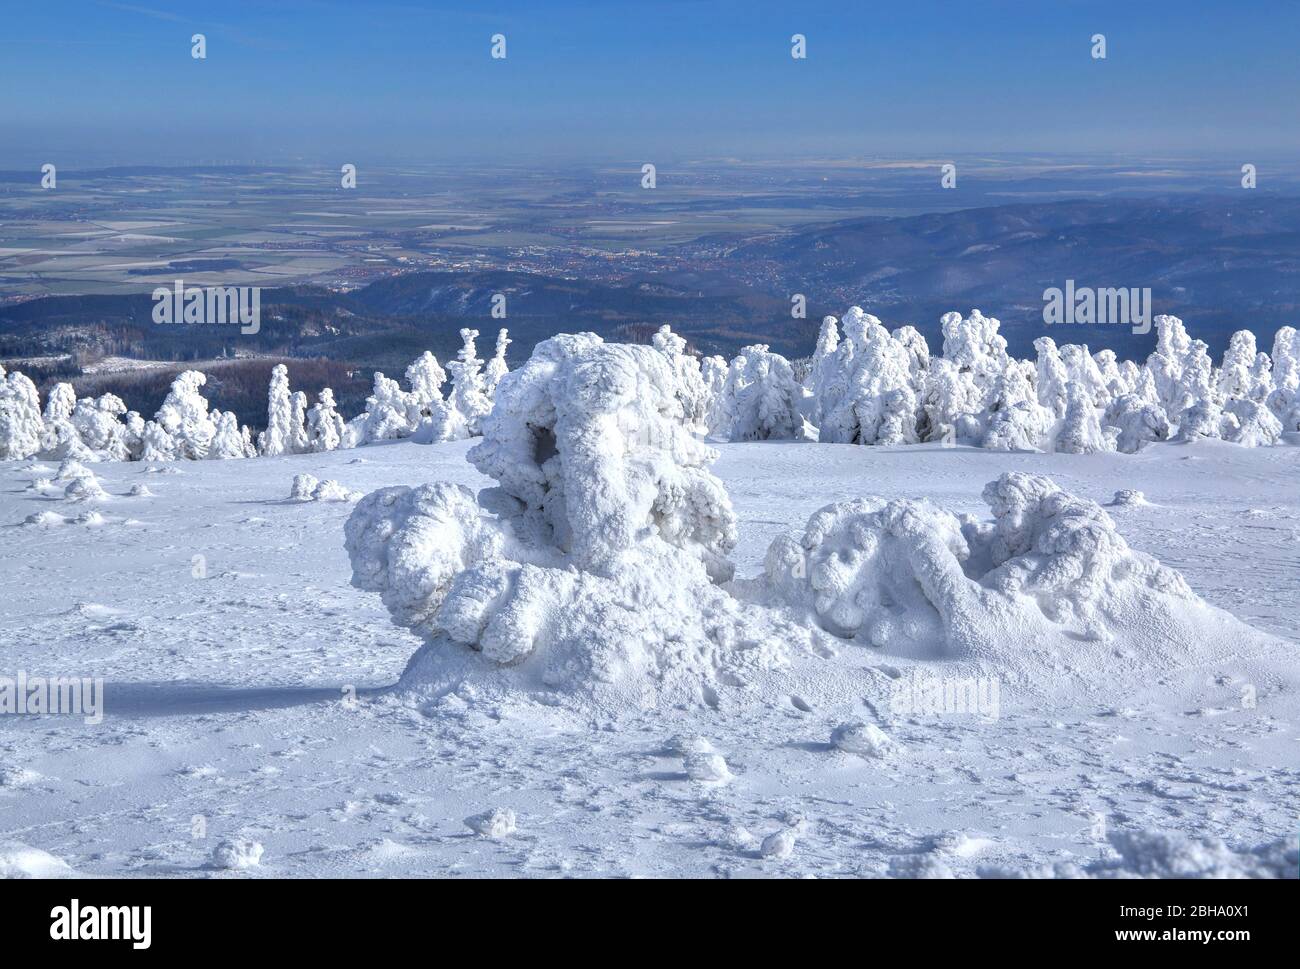 Winter landscape with icy trees at Brocken, Wernigerode, Harz Nature Park, Saxony-Anhalt, Germany Stock Photo